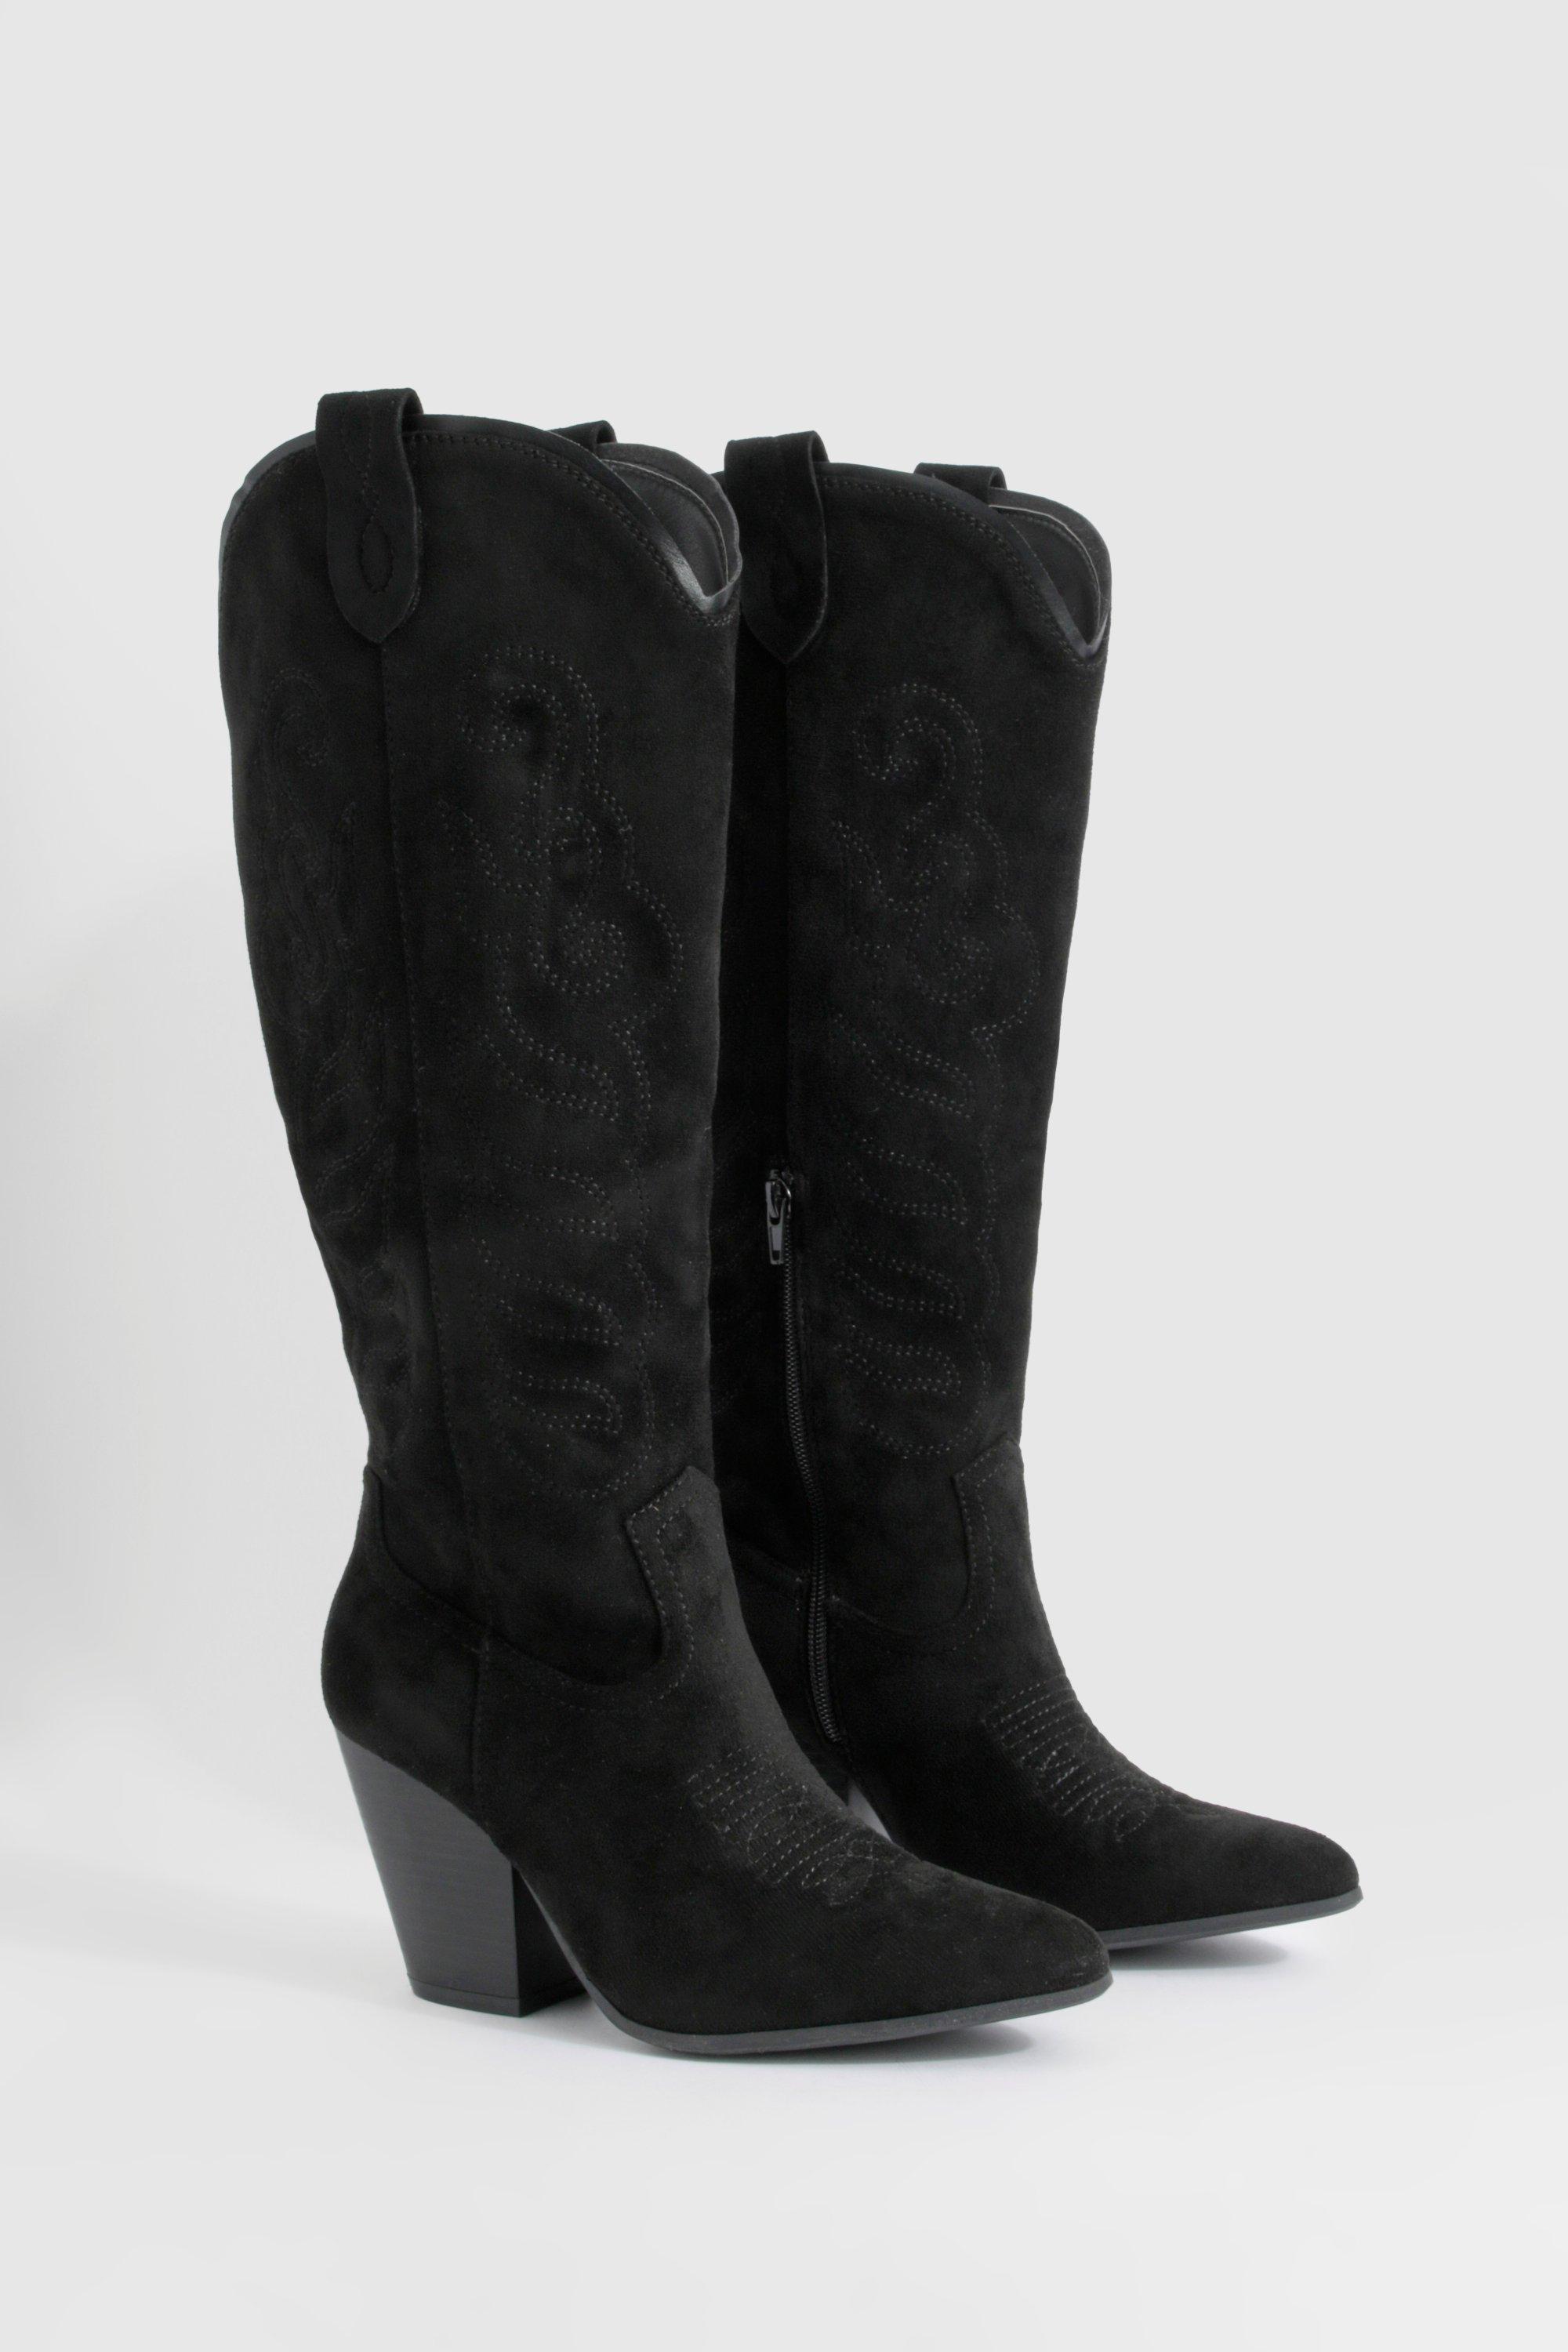 Image of Embroidered Knee High Western Cowboy Boots, Nero